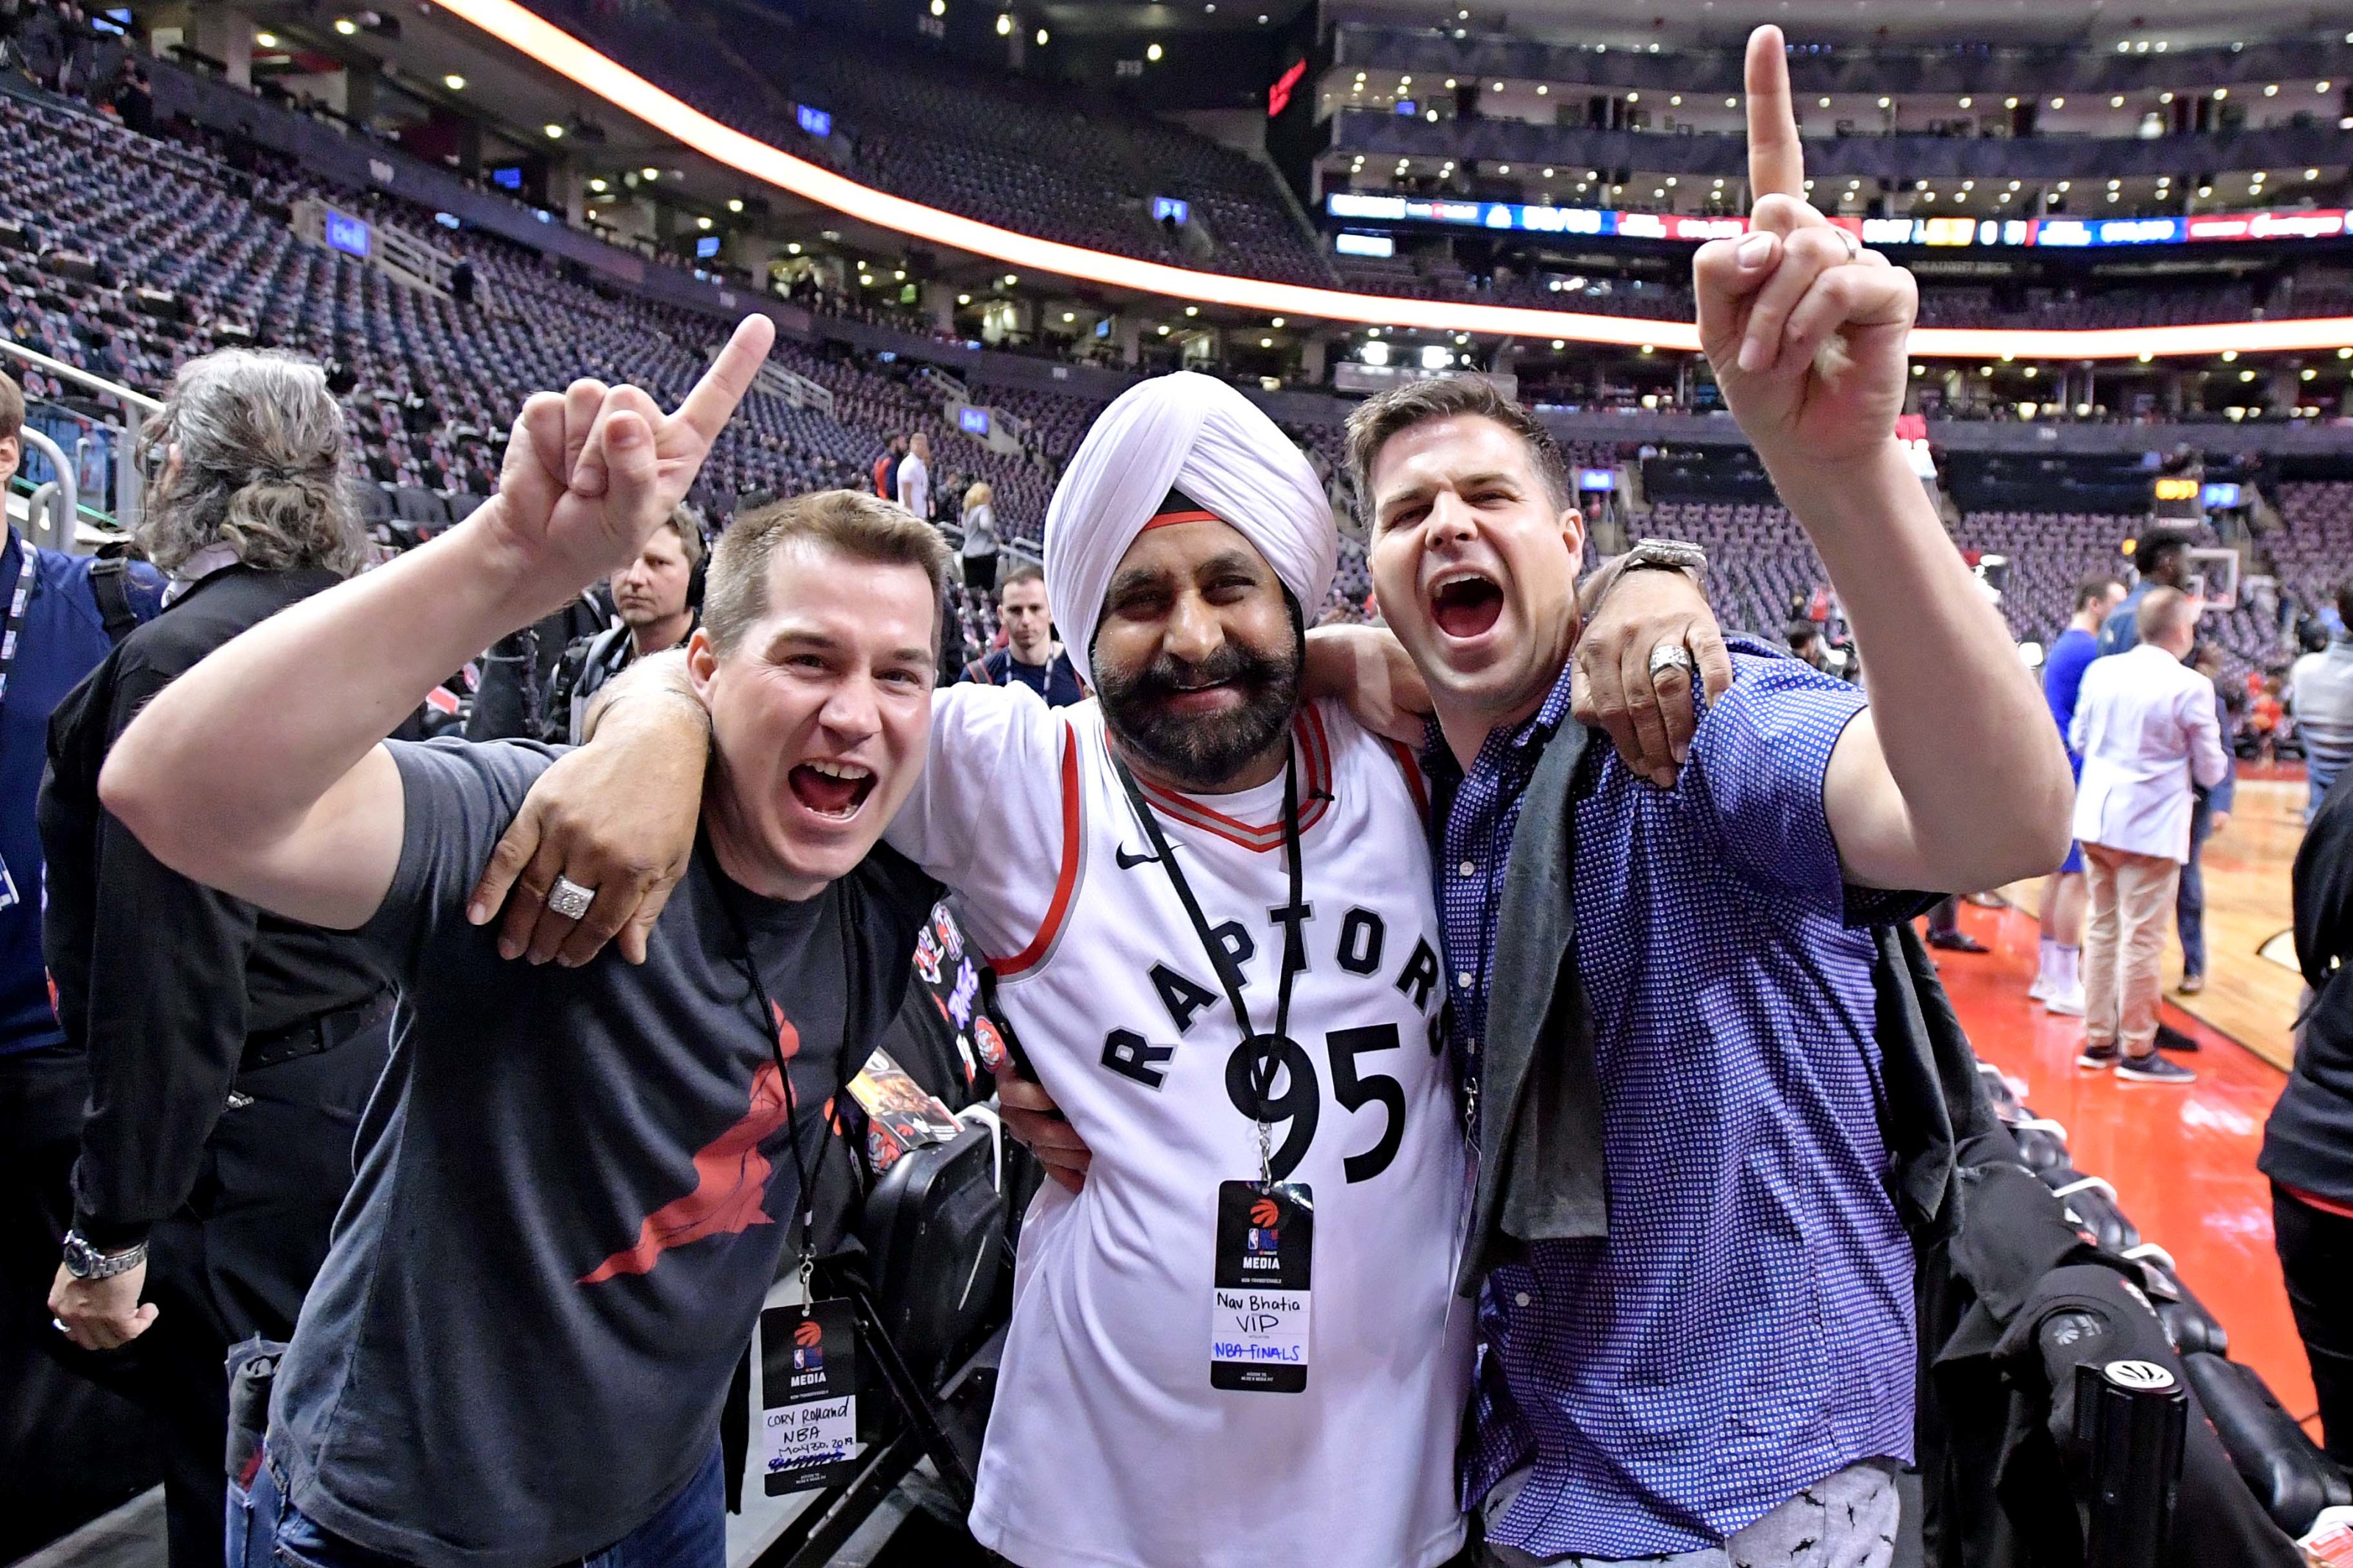 This Toronto Raptors fan never misses a game